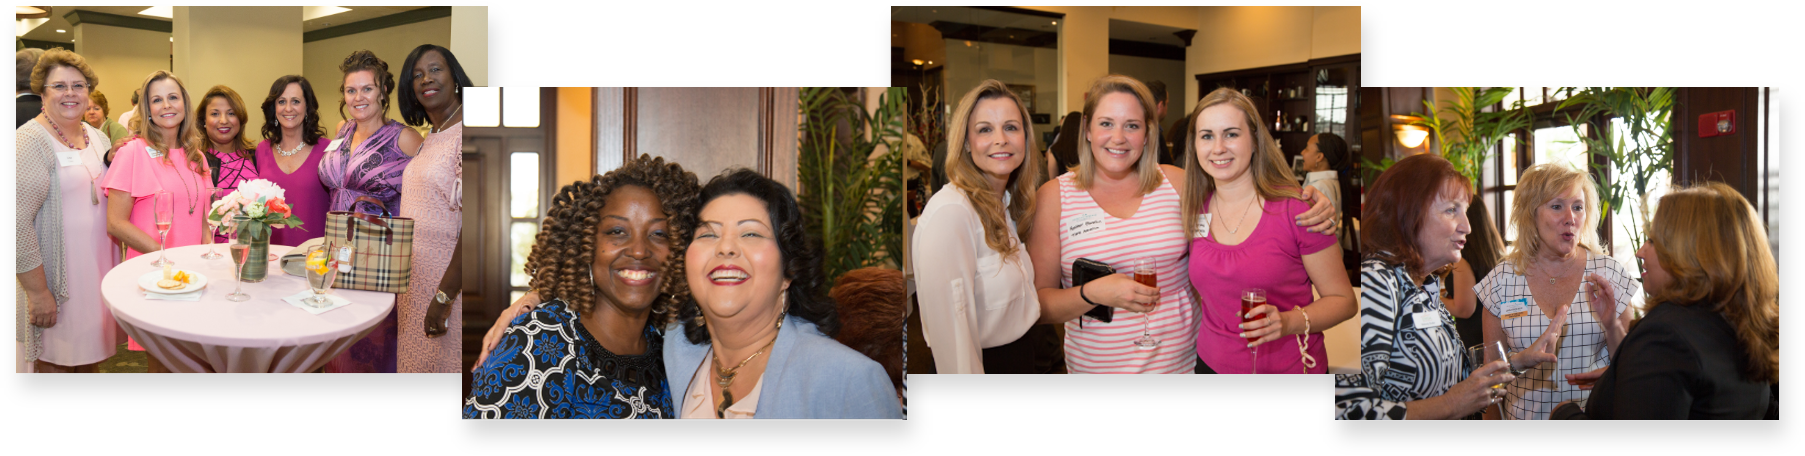 Smiling women participating in Women of Excellence events